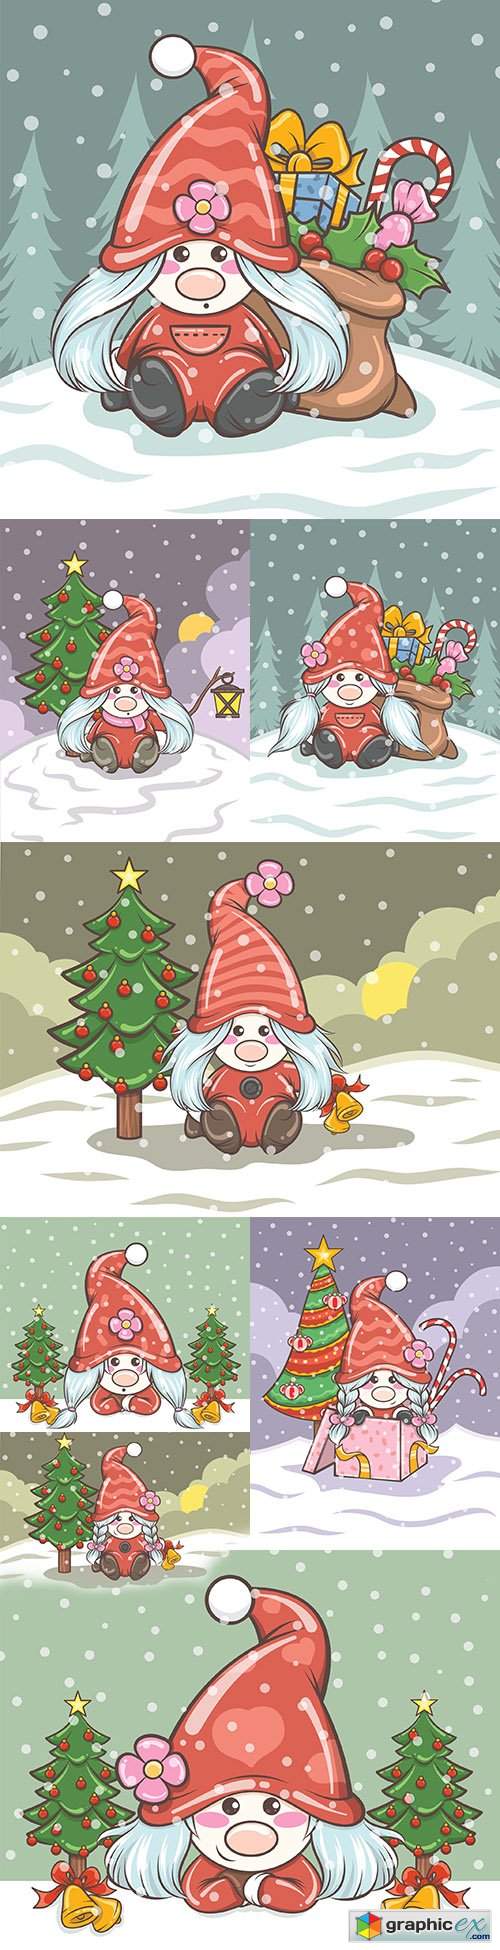  Sweet girl gnome with gifts Christmas illustration 